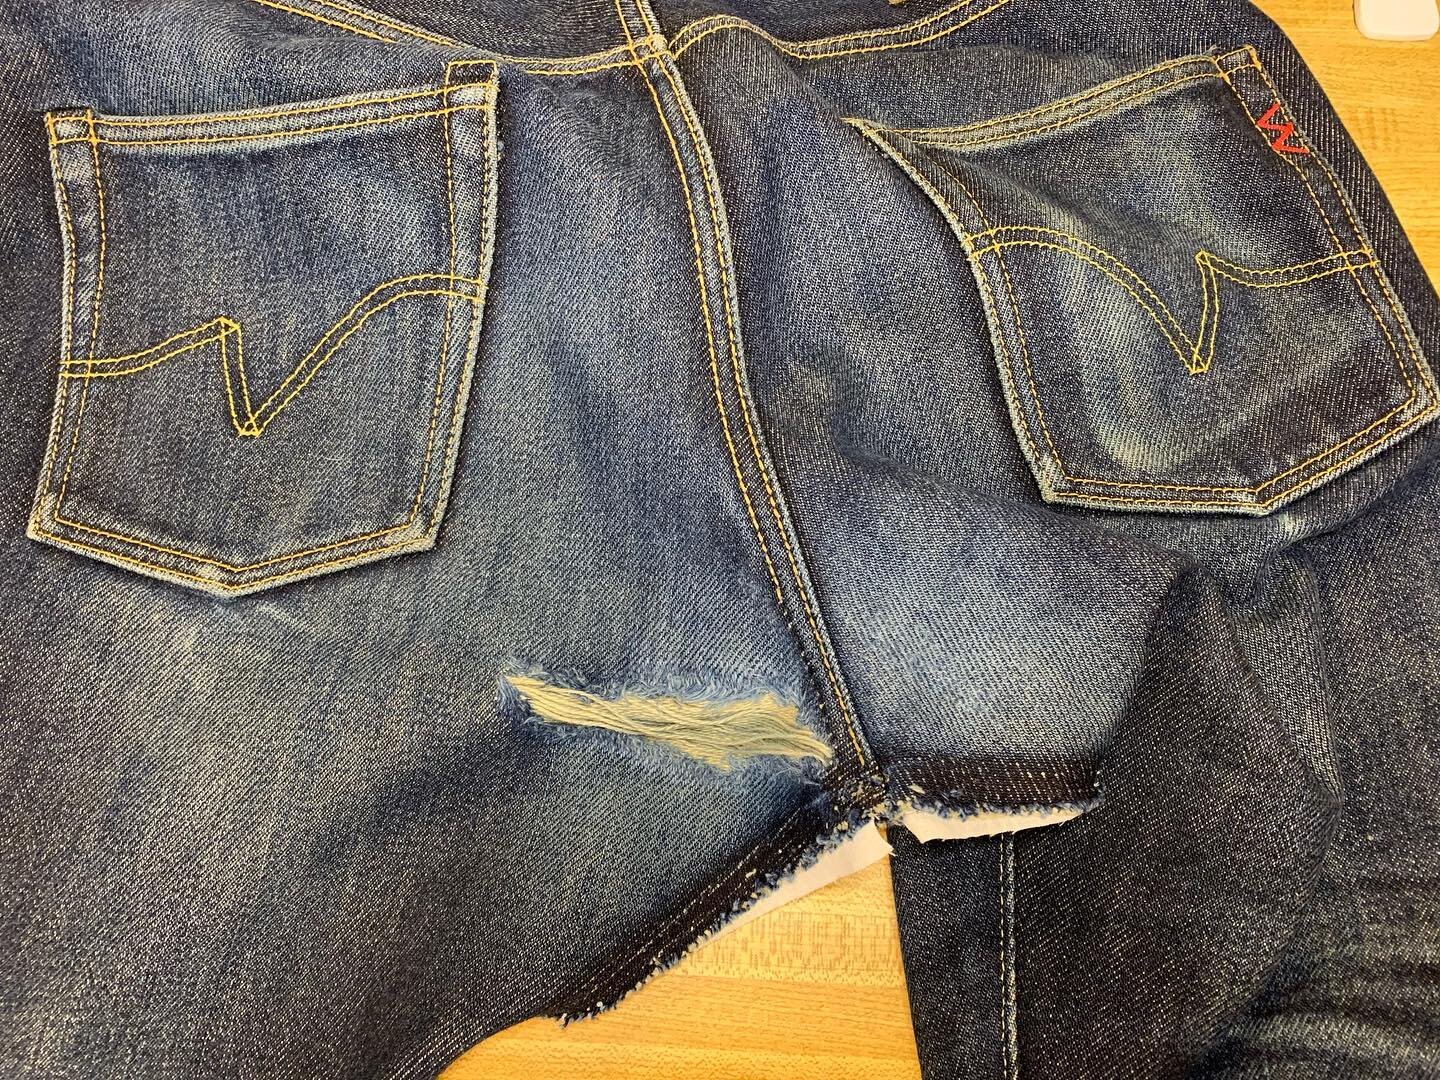 First @ironheartdenim repairs I&rsquo;ve done. Working with 23oz denim isn&rsquo;t has hard as you might think, I definitely enjoyed it.